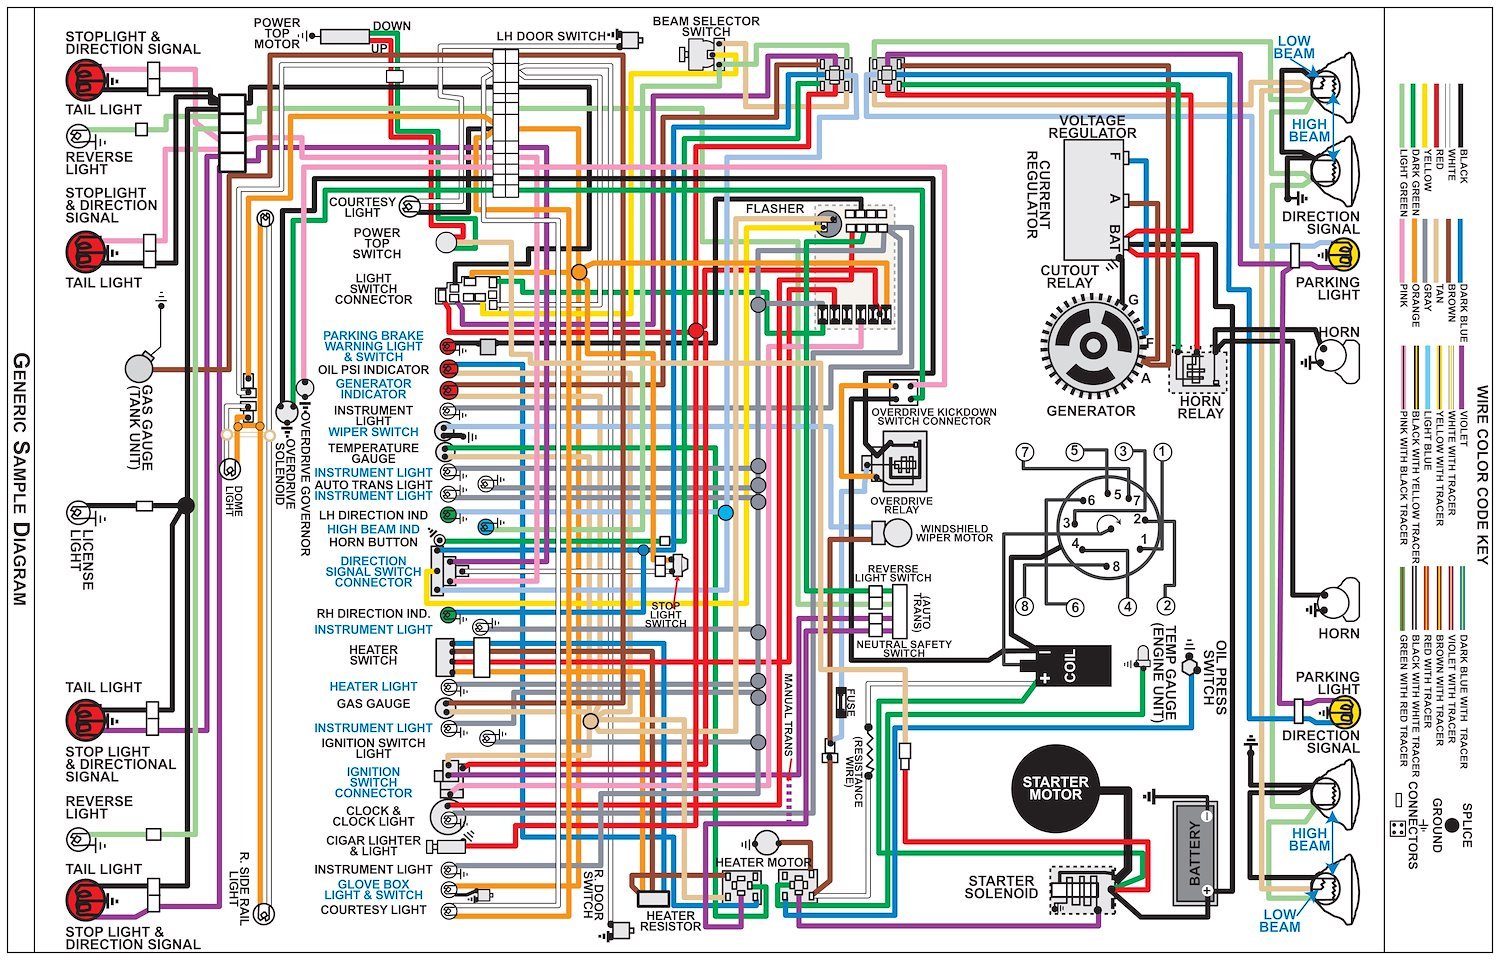 Wiring Diagram for 1951 Ford Car, 11 in x 17 in., Laminated